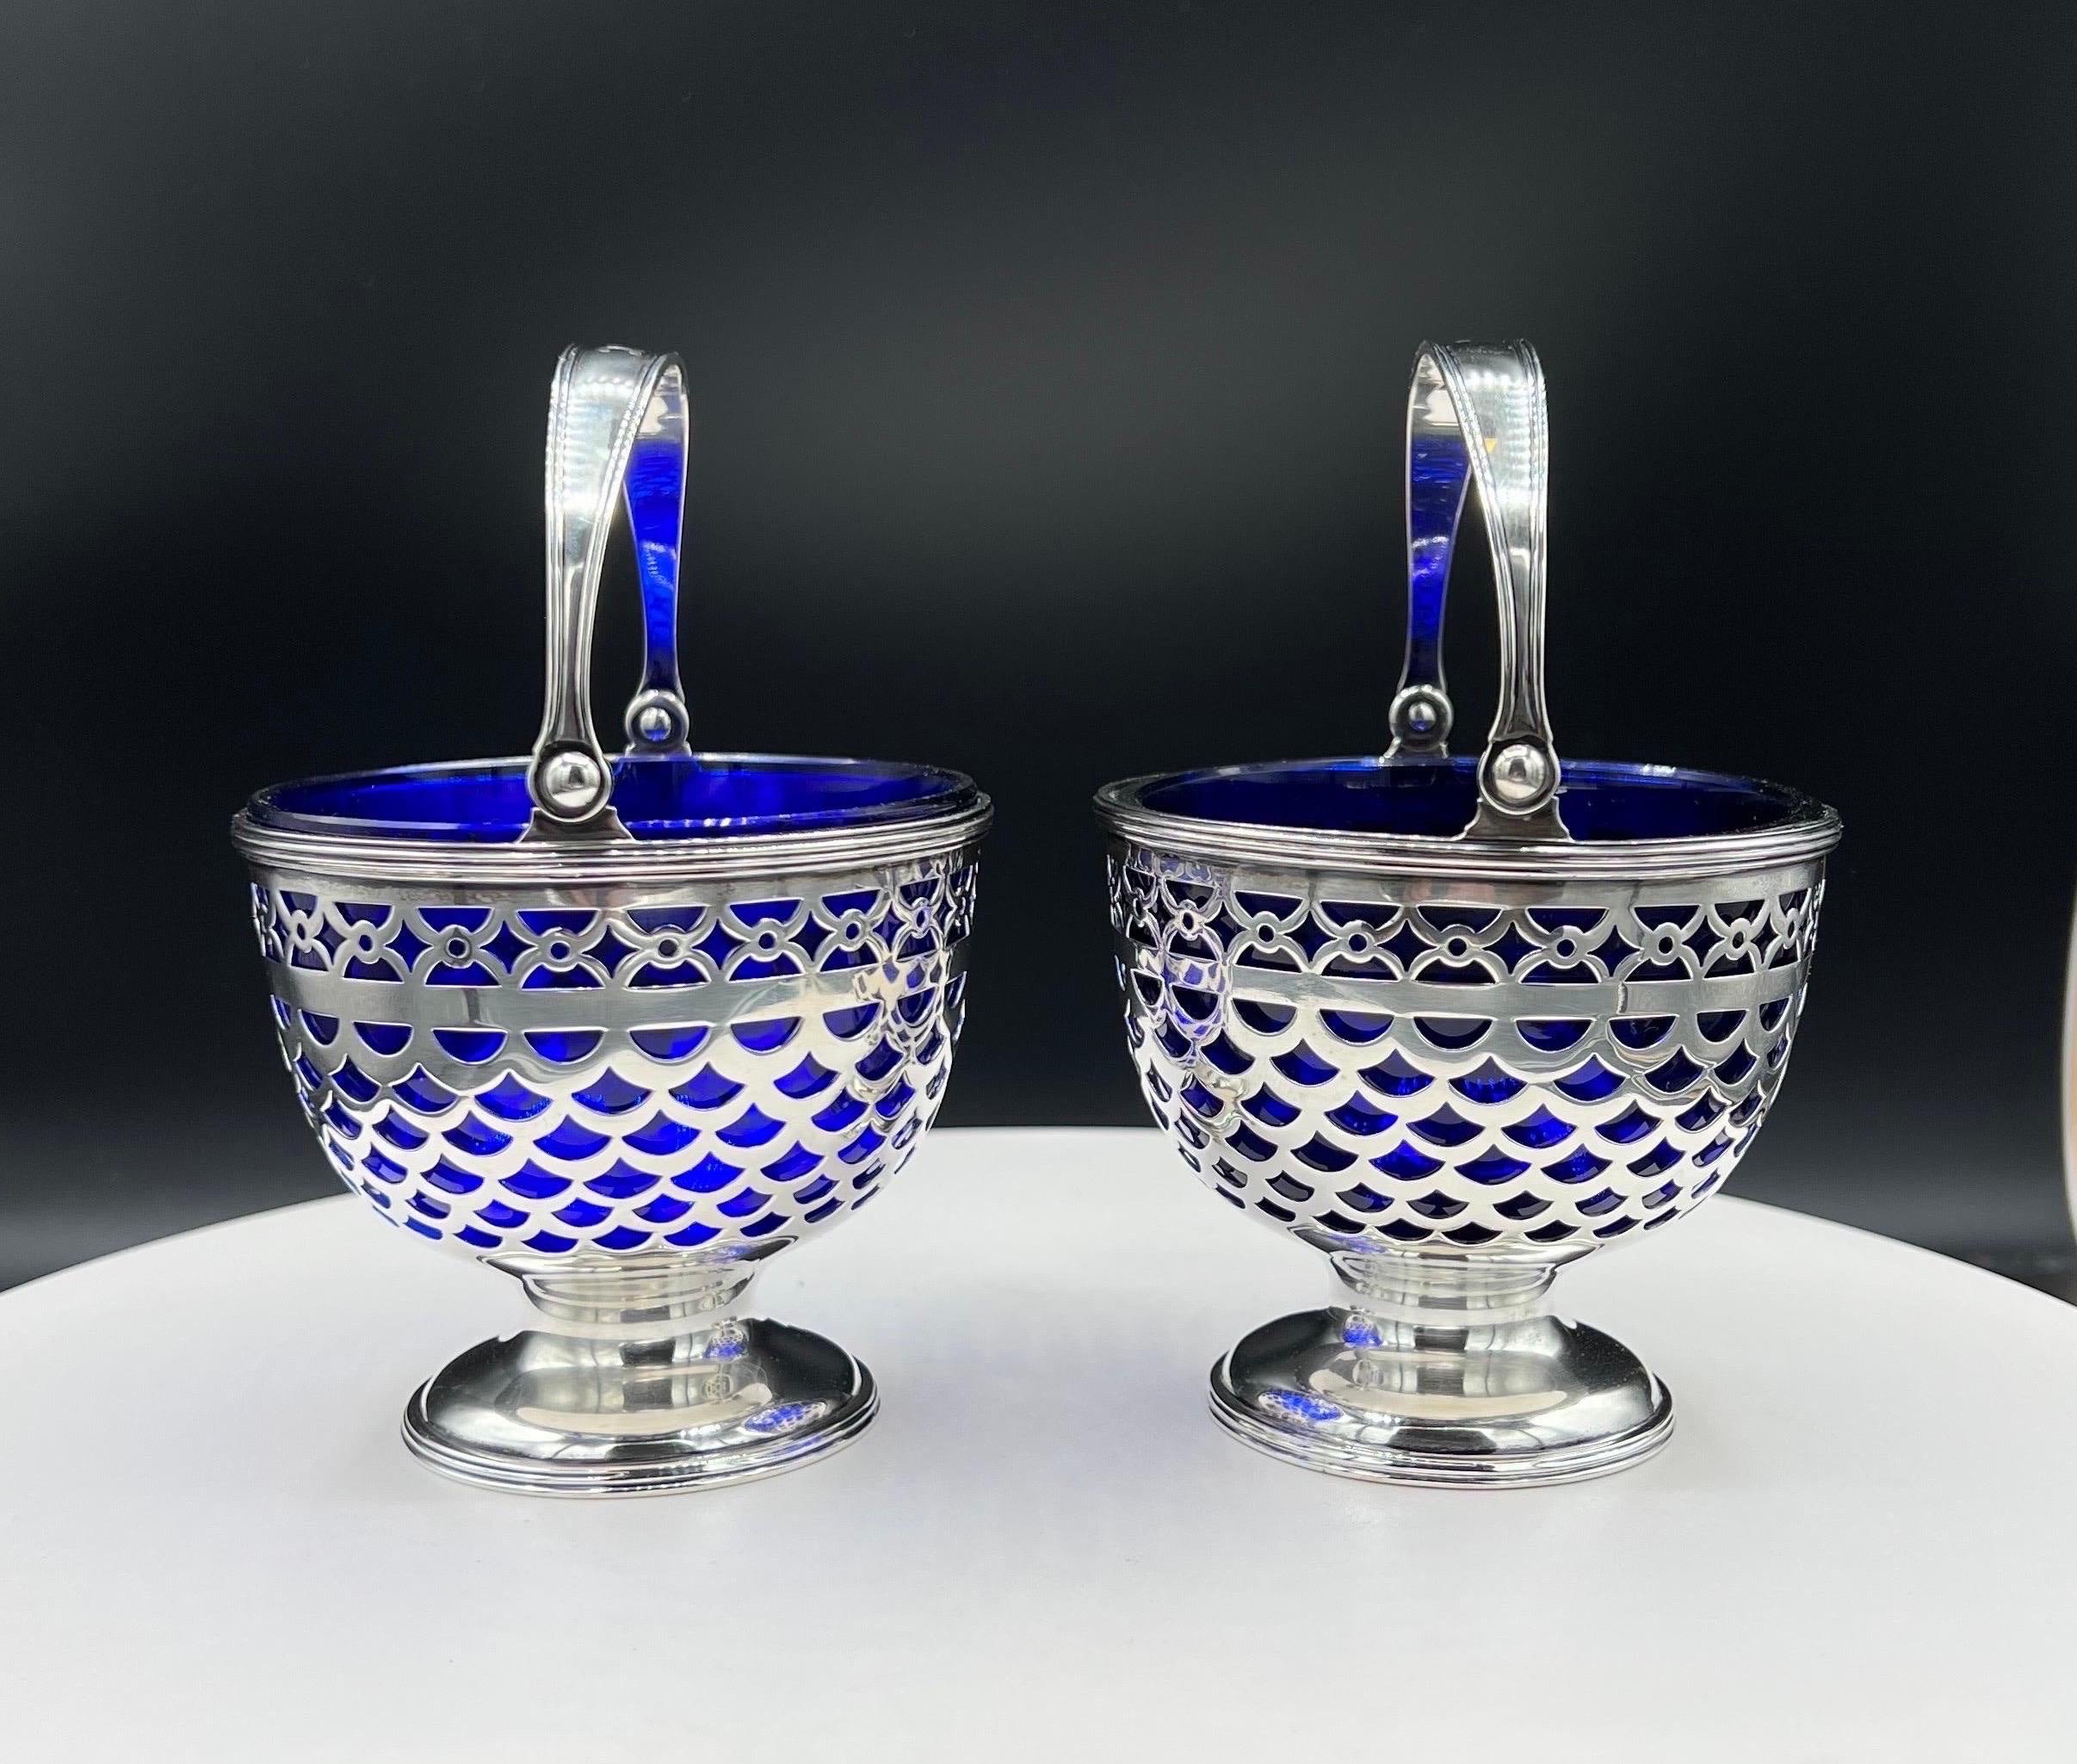 This sterling silver bonbon basket with a cobalt glass liner, by the world-renowned Tiffany & Company. It Pierced open-fret work design allows the cobalt glass to shine through. Raised on a pedestal base (not weighted) the basket handles Its fold